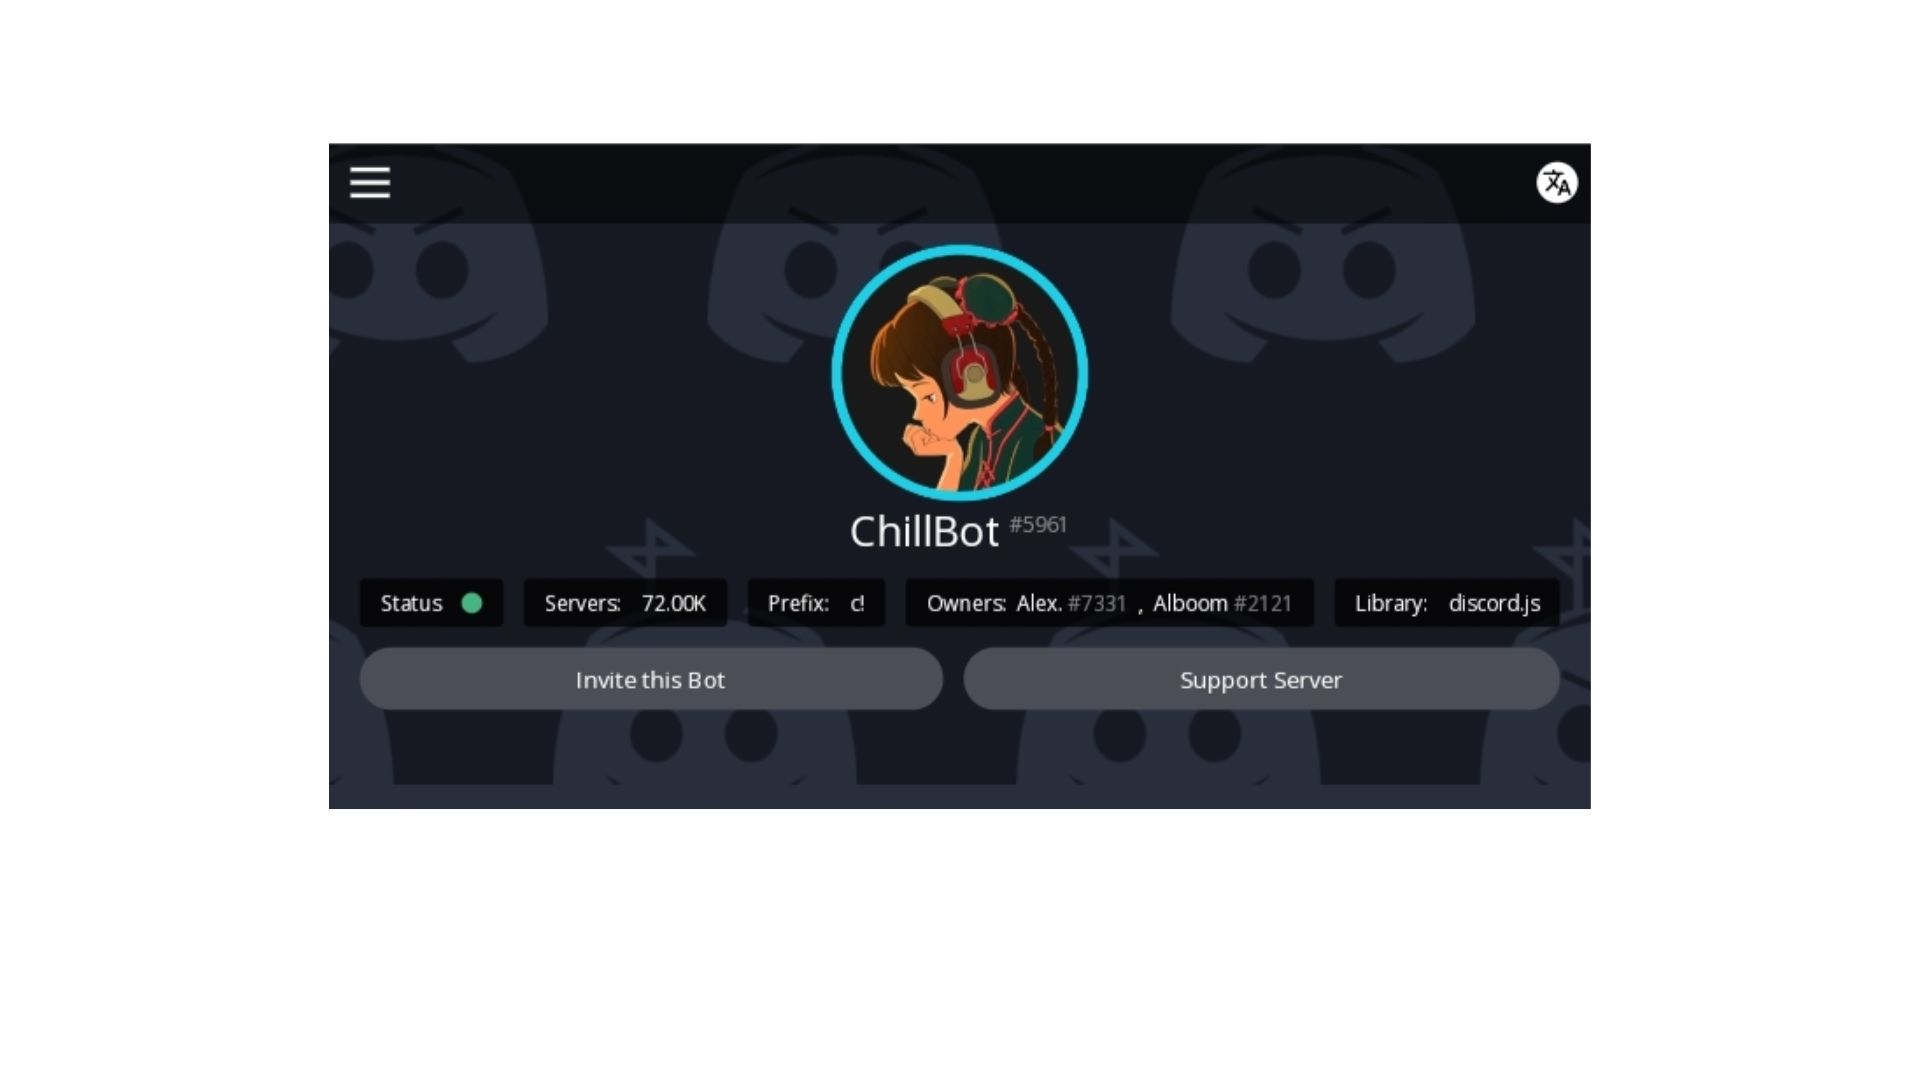 GitHub - ItsOnlyGame/Rift: This is a discord bot mainly for playing music